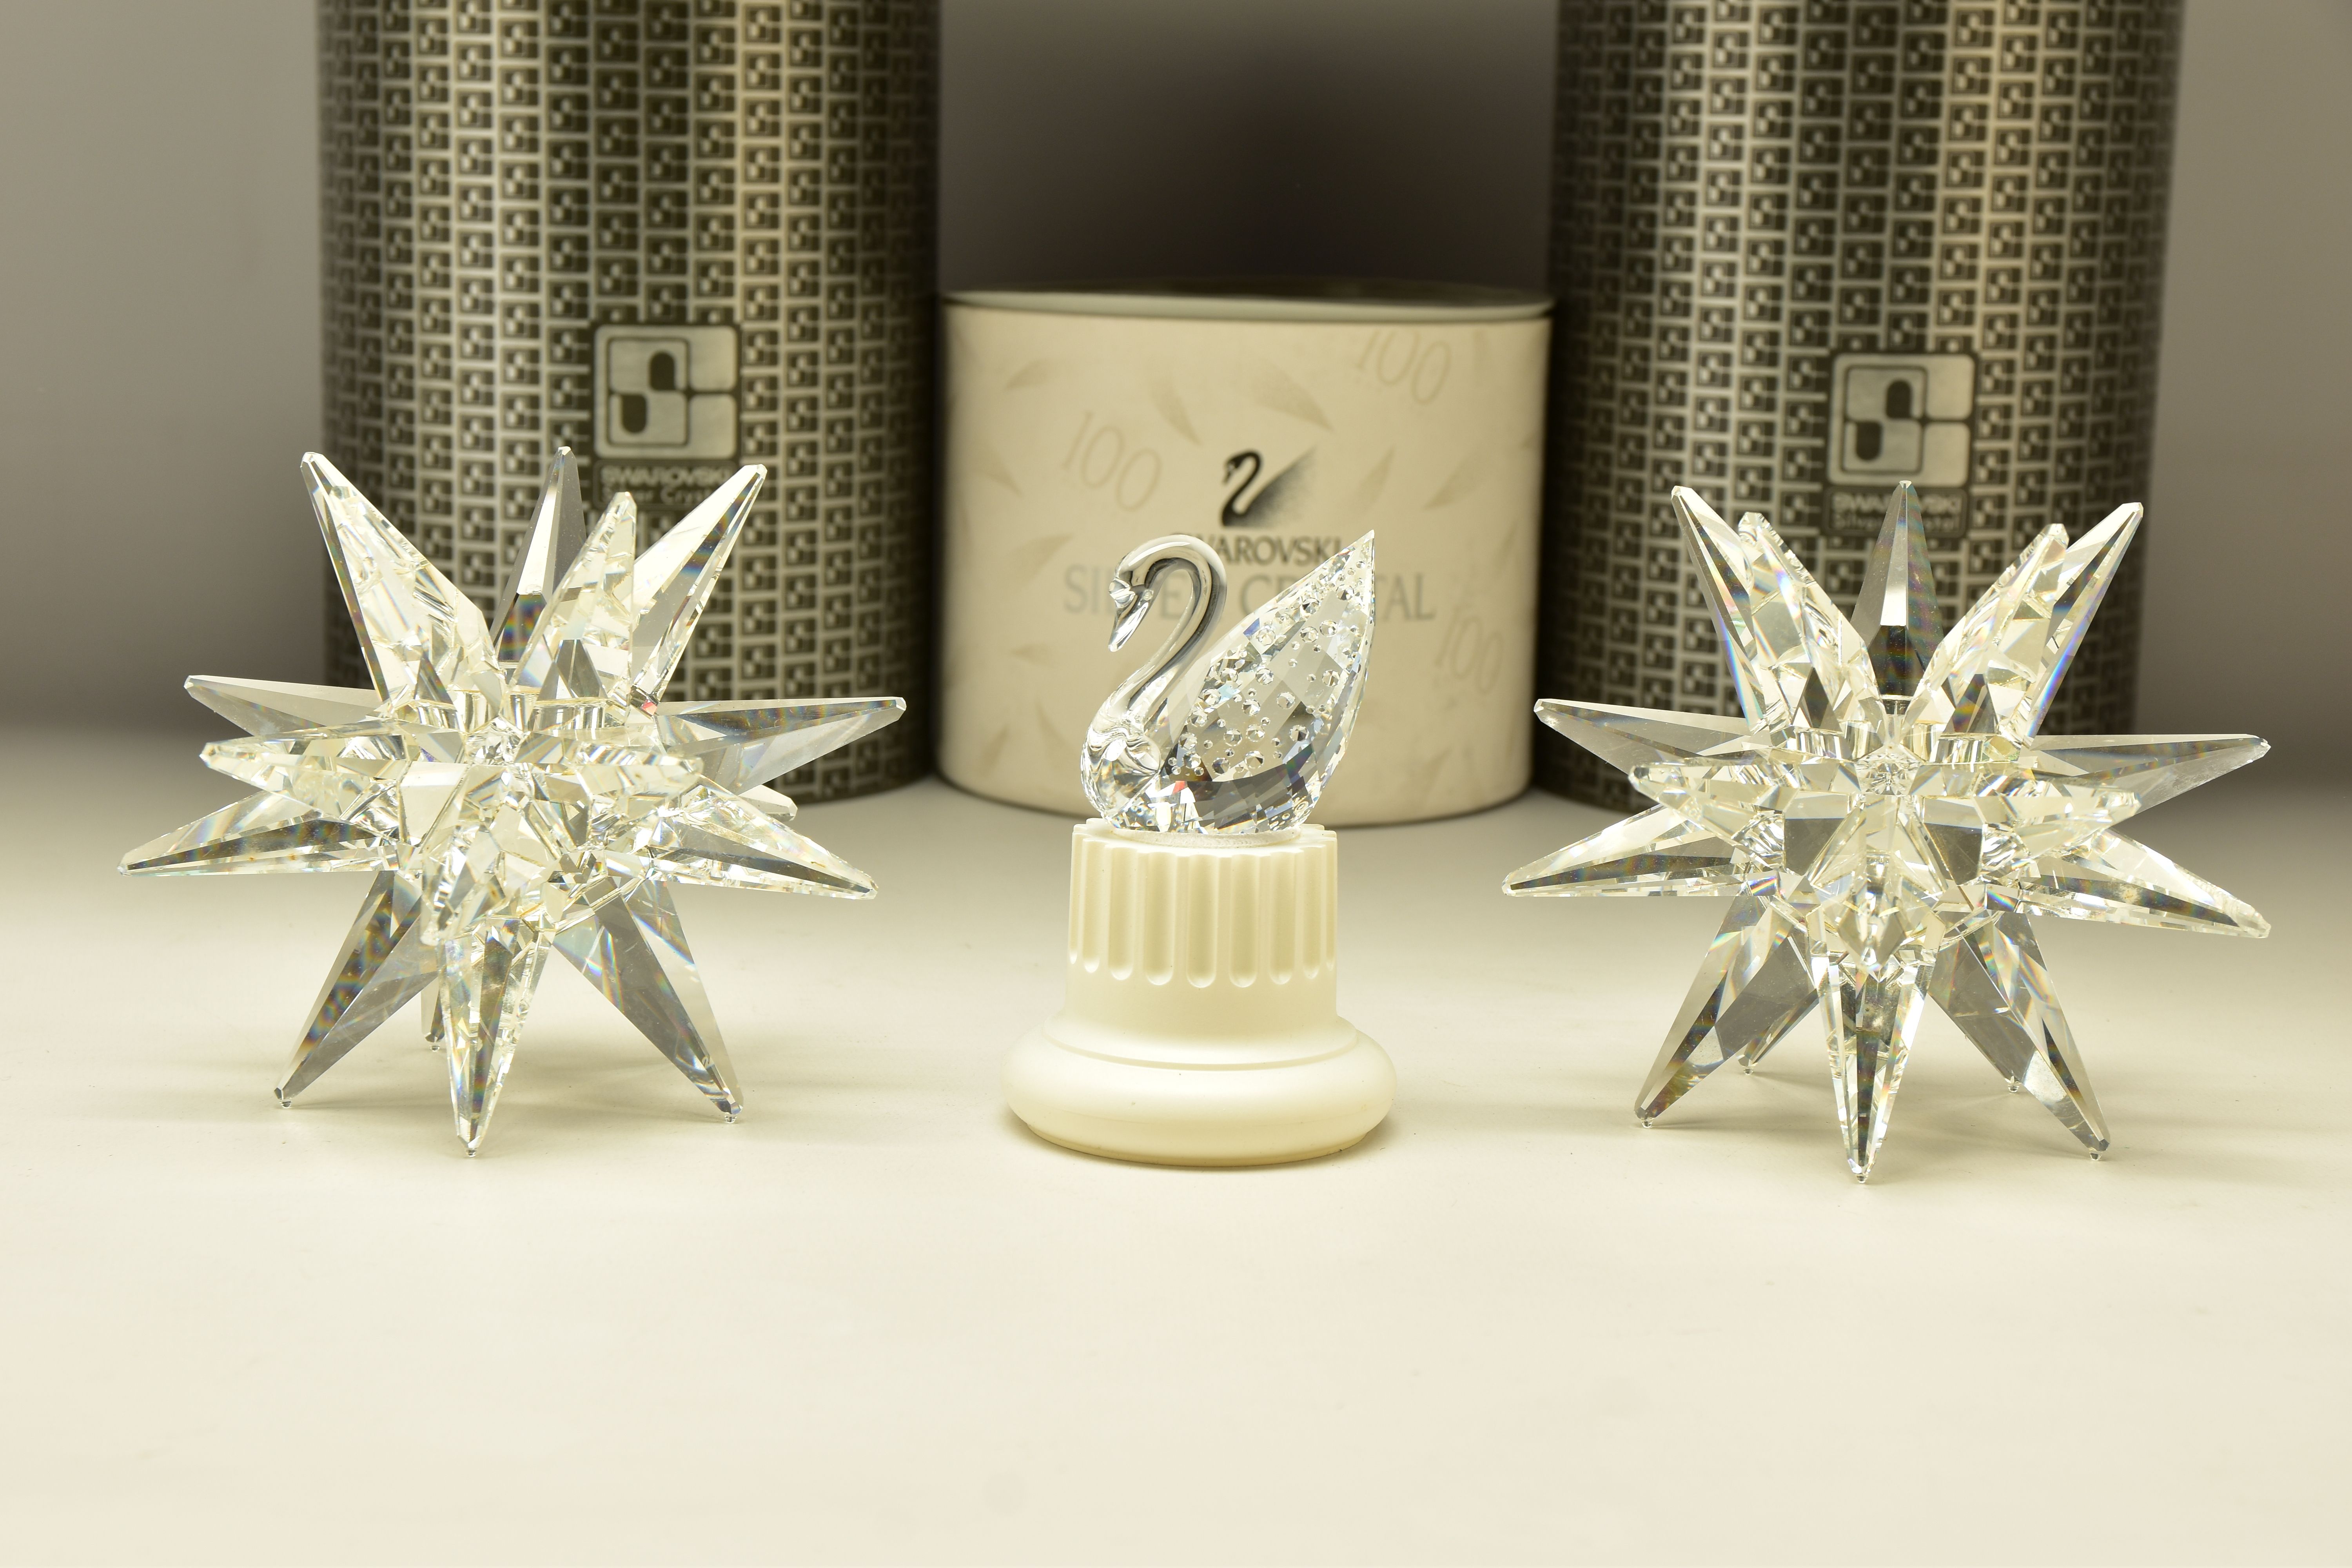 TWO BOXED SWAROVSKI CRYSTAL 143L STAR CANDLEHOLDERS (013748), 1987 retired 1996, height 11cm x width